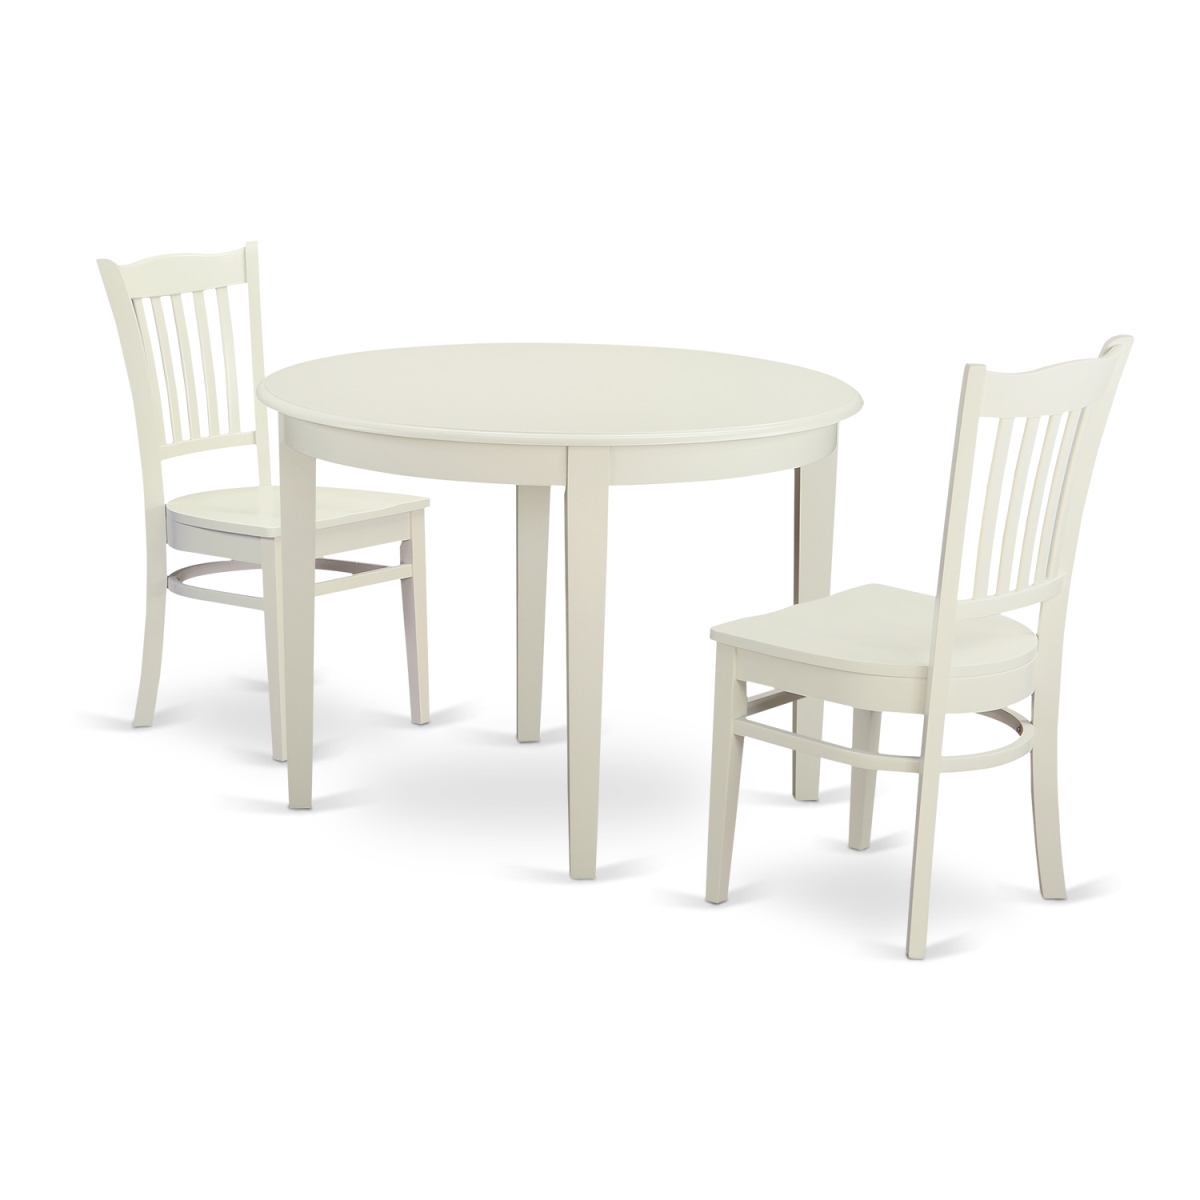 Dinette Table Set With 2 Kitchen Table & 2 Chairs, Linen White - 3 Piece